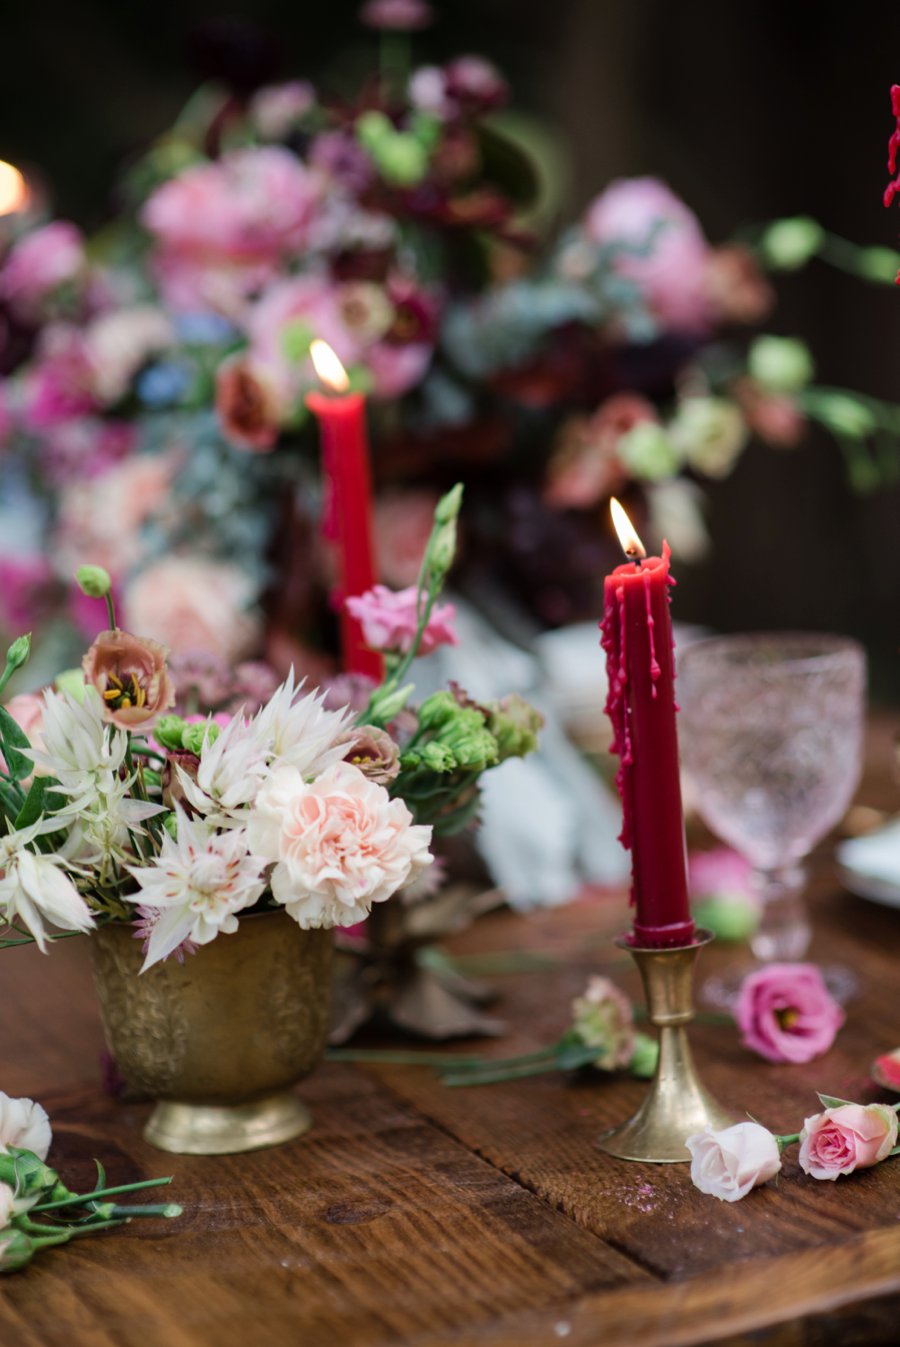 Bold Berry-toned Vintage Inspired Wedding Ideas | Every Last Detail